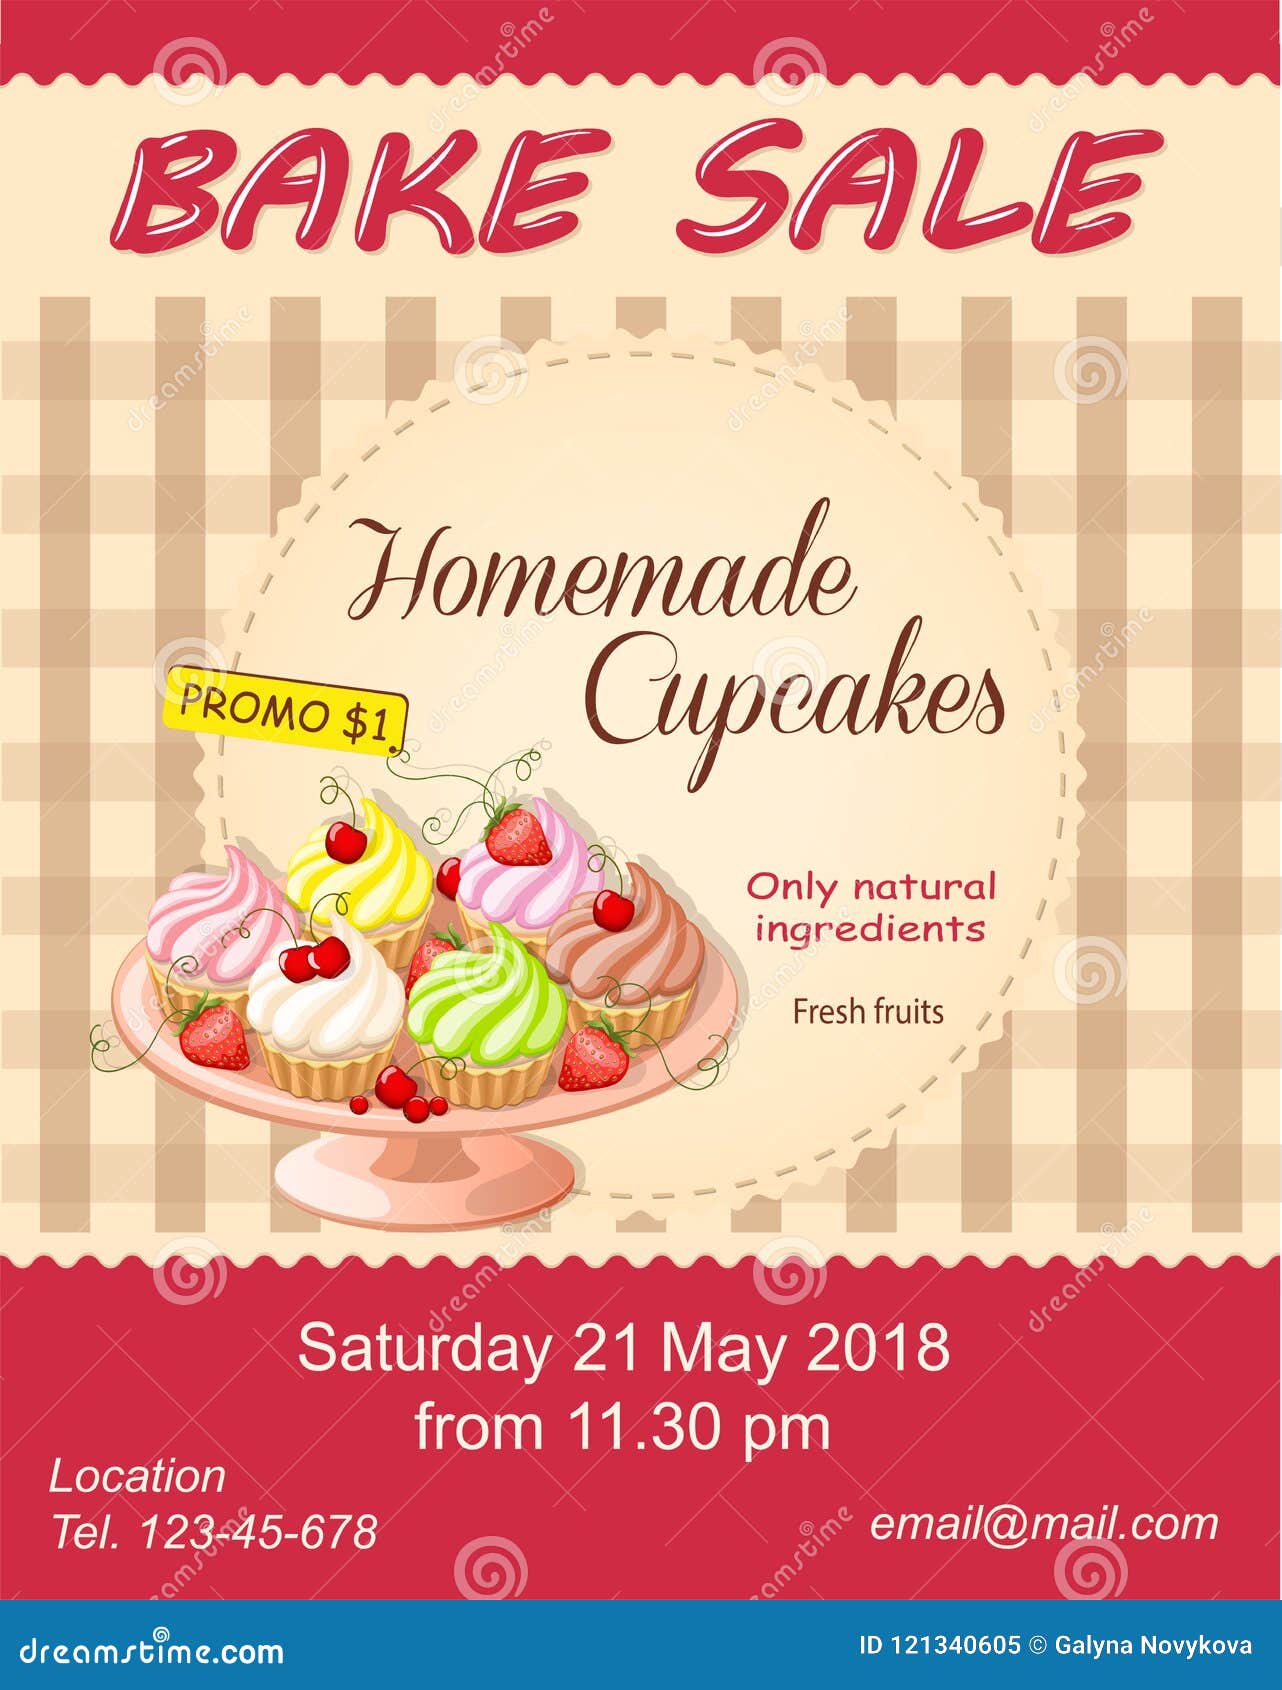 Red Bake Sale Promotion Flyer with Cupcakes on the Plate Stock In Bake Sale Flyer Free Template